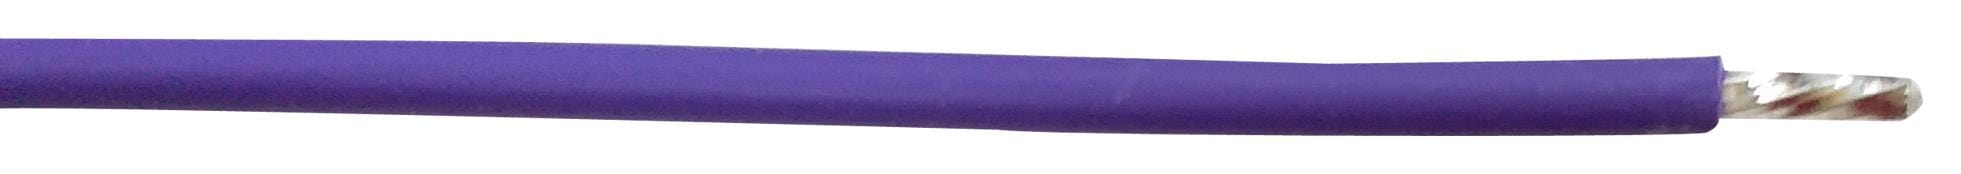 PRO POWER Single Wire PP002320 HOOK-UP WIRE, 22AWG, PURPLE, 305M, 300V PRO POWER 2919479 PP002320